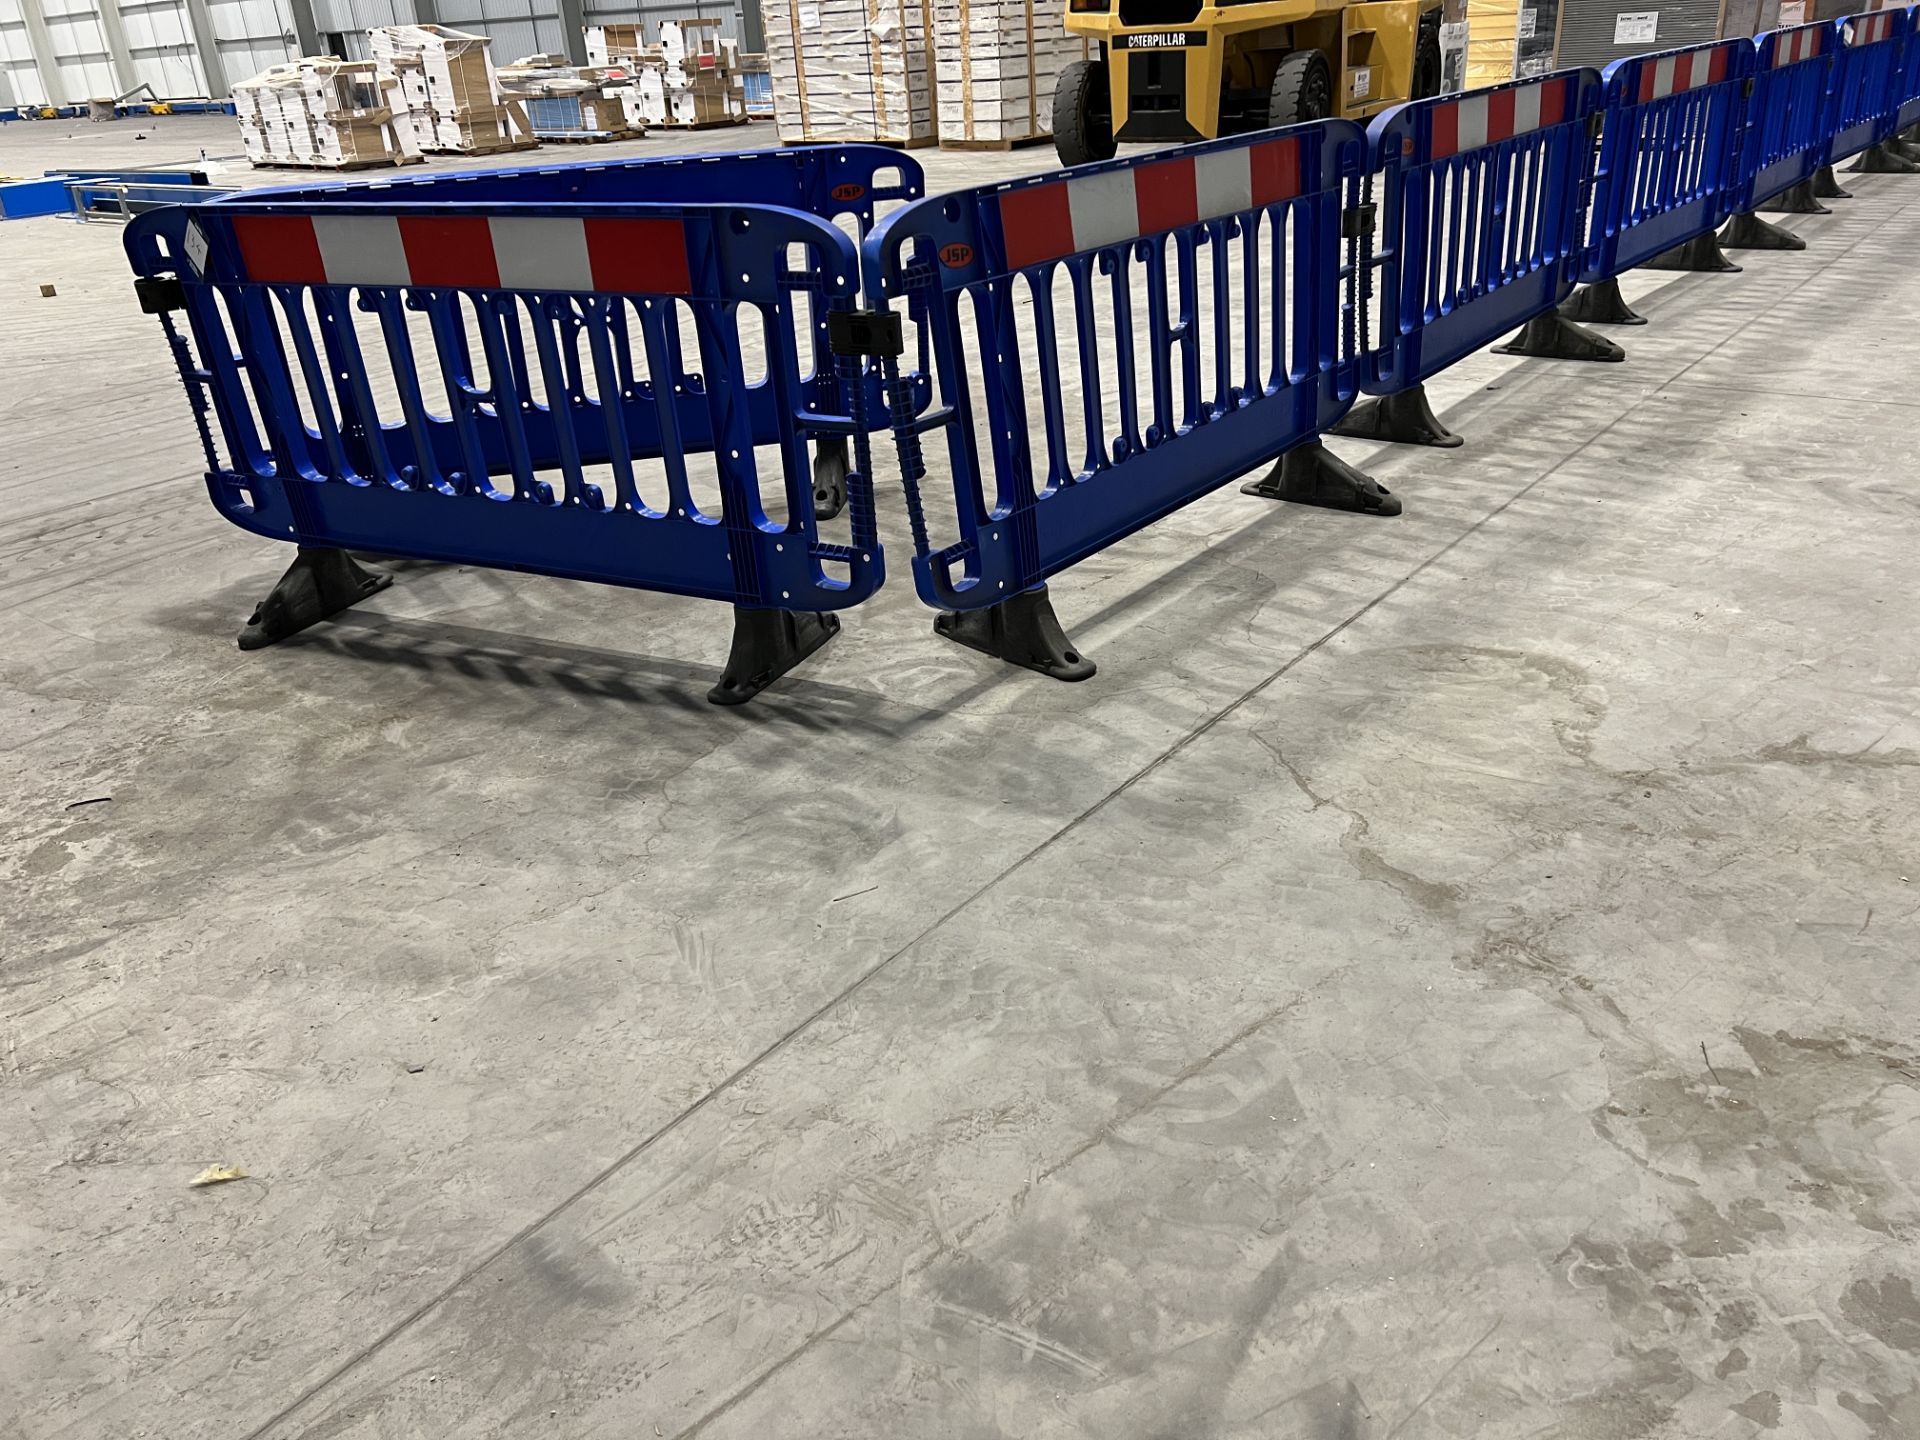 Qty 24, JSP Titan Blue and black plastic site safety barriers